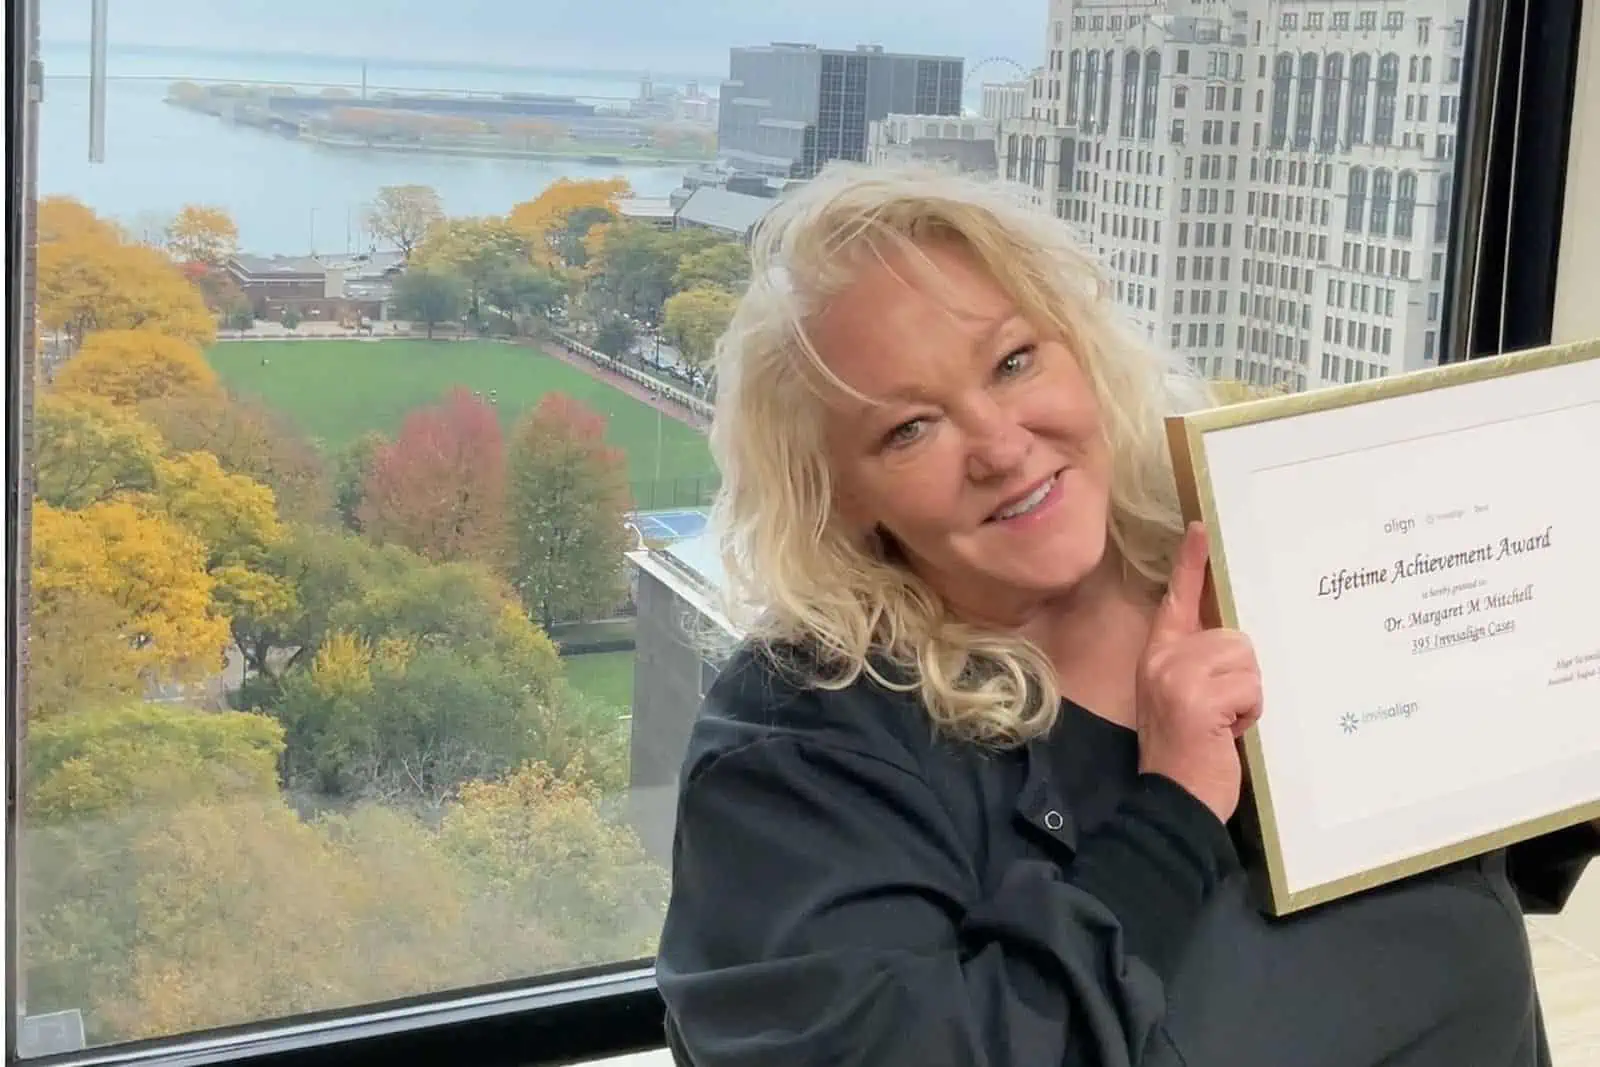 Dr. Margaret Mitchell proudly displaying her award for being the her Lifetime Achievement Award in front of a window showing the Chicago skyline.